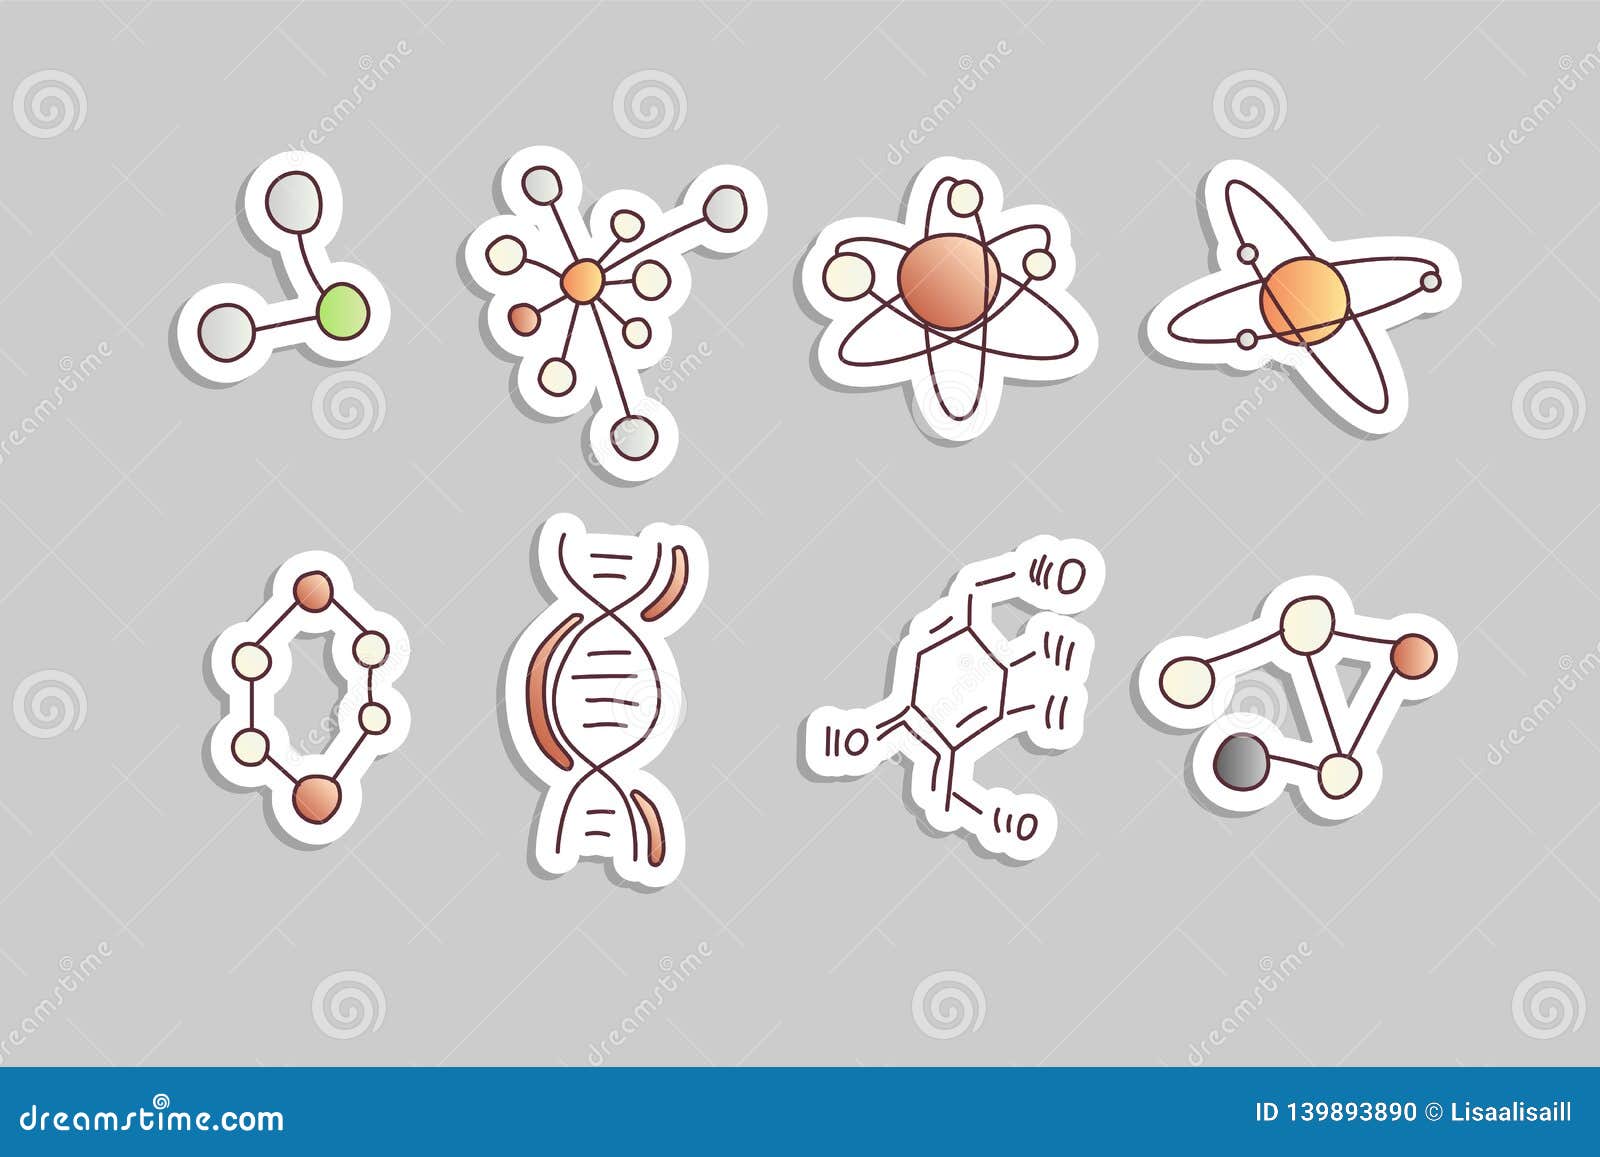 cute cartoon molecule and atom icon set. atomic and molecular . structure of molecula and atom with electron